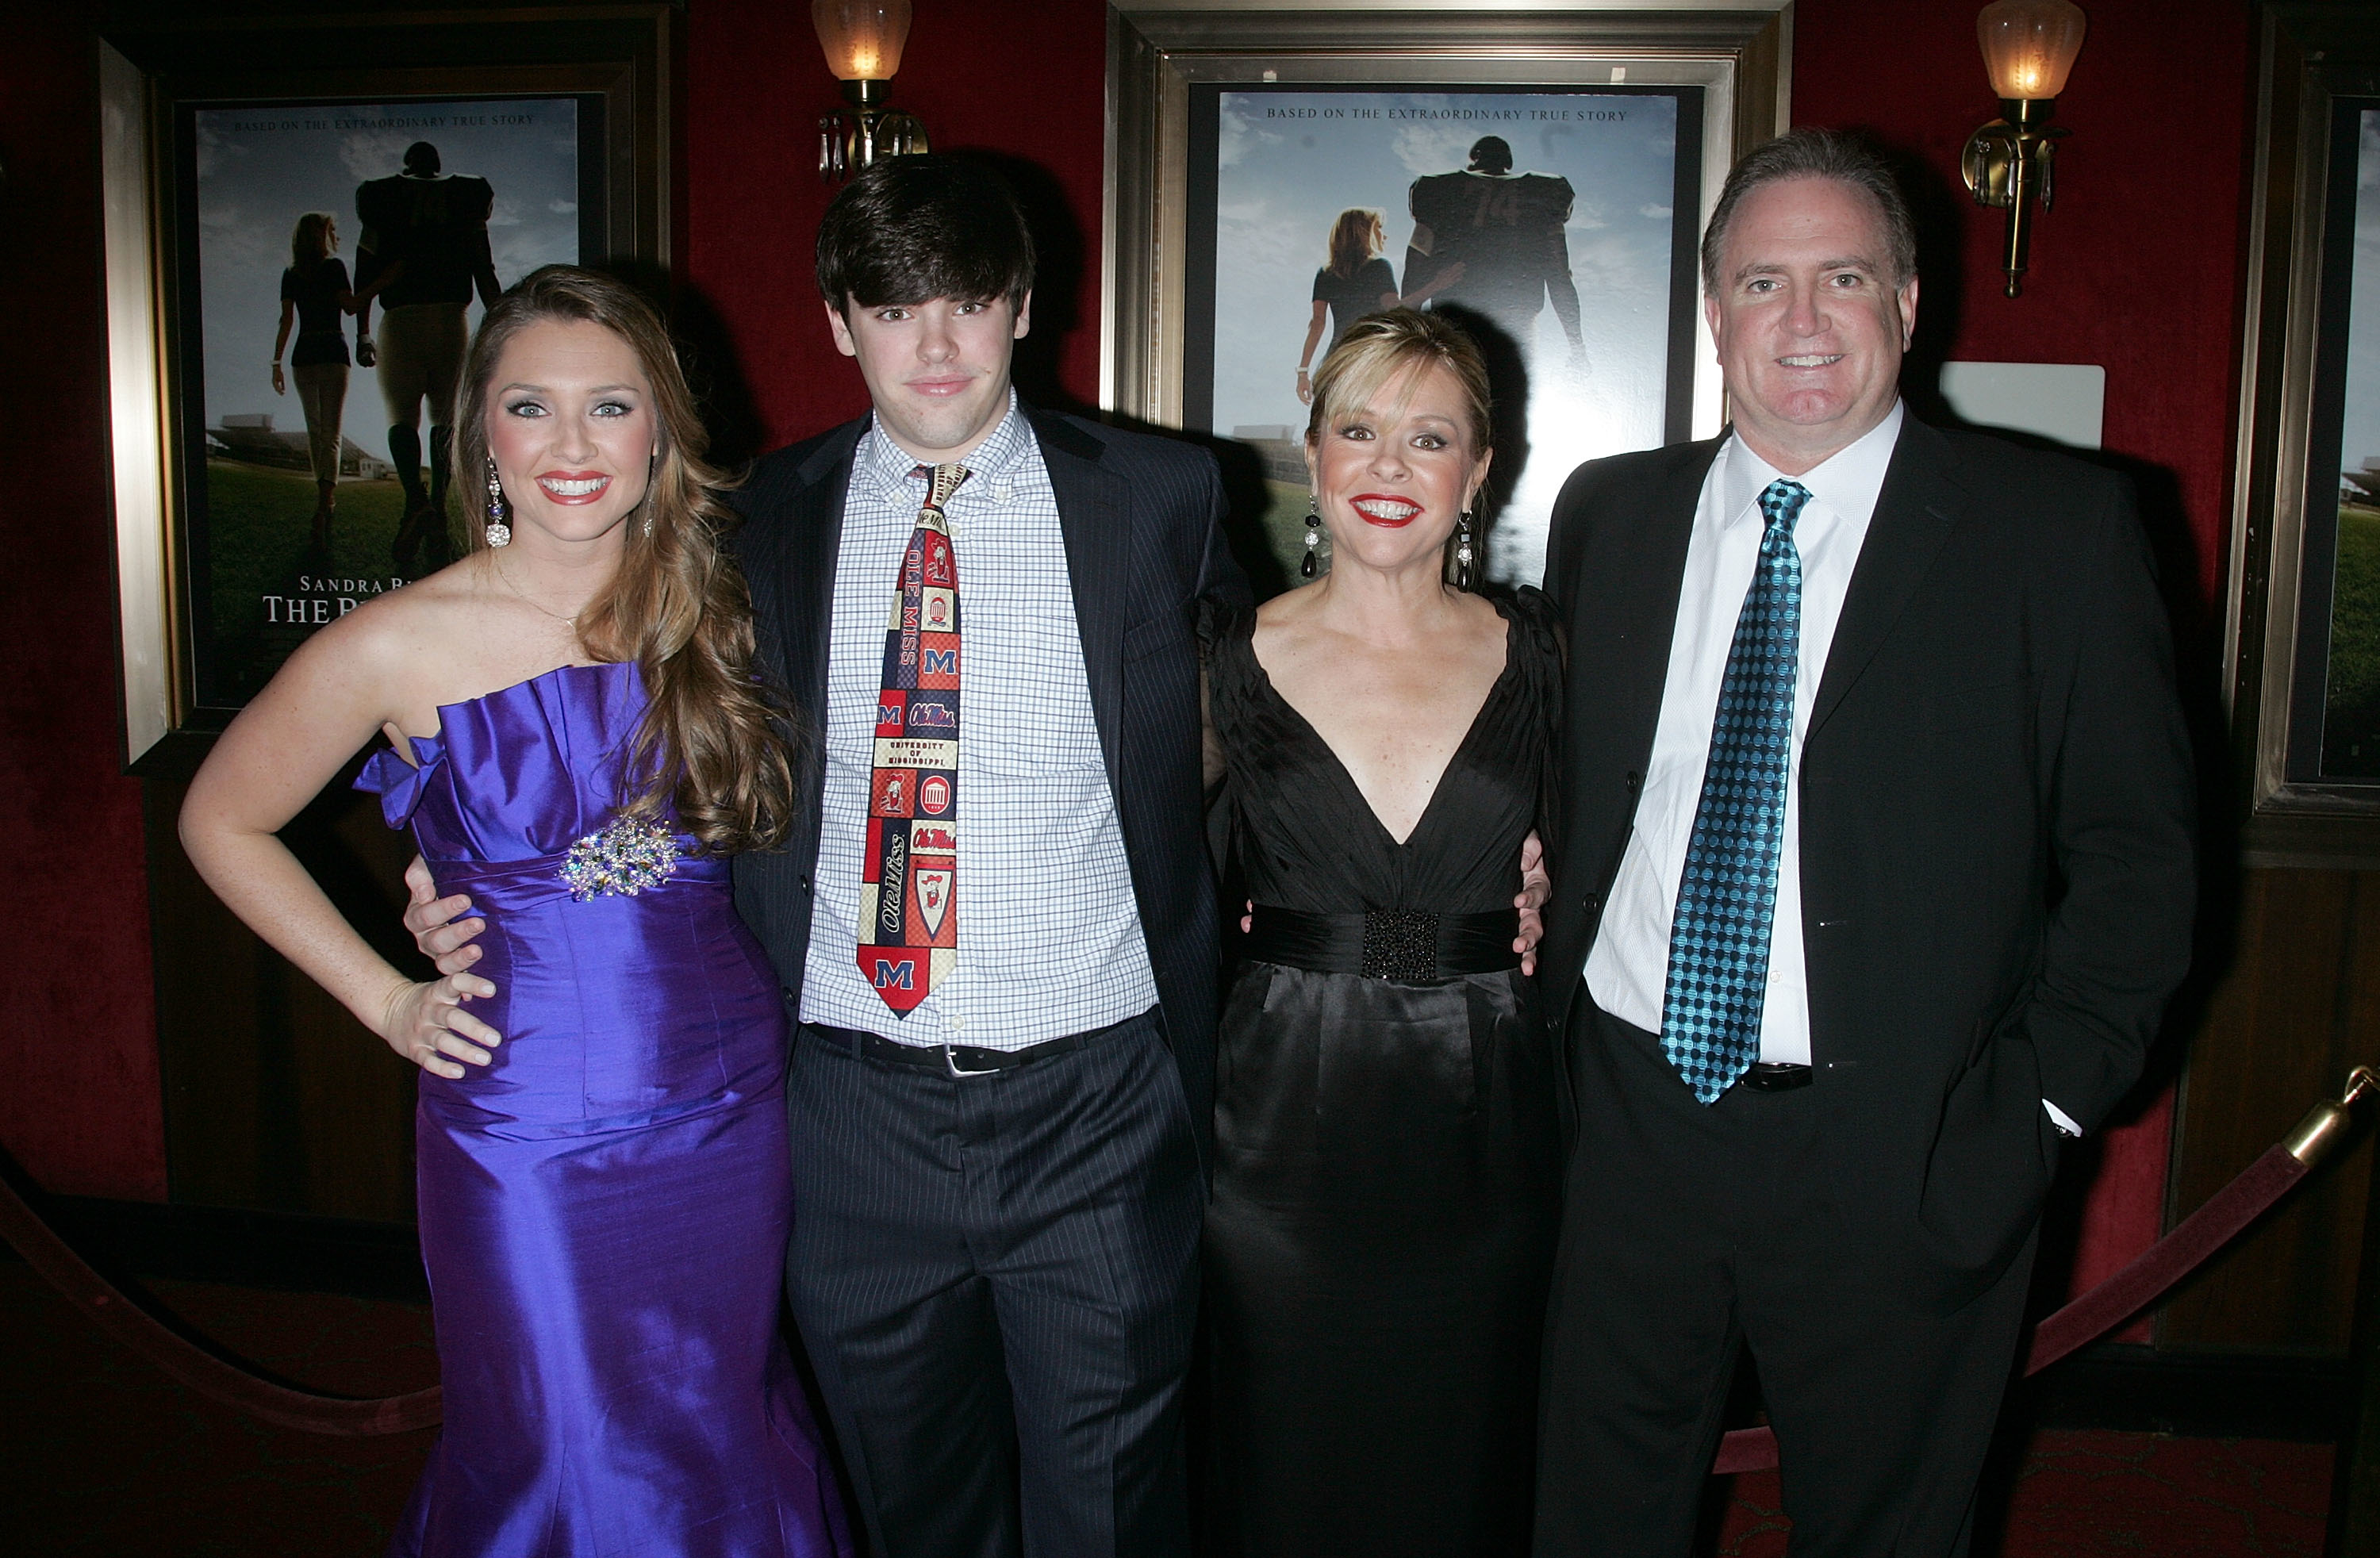 The Tuohy family